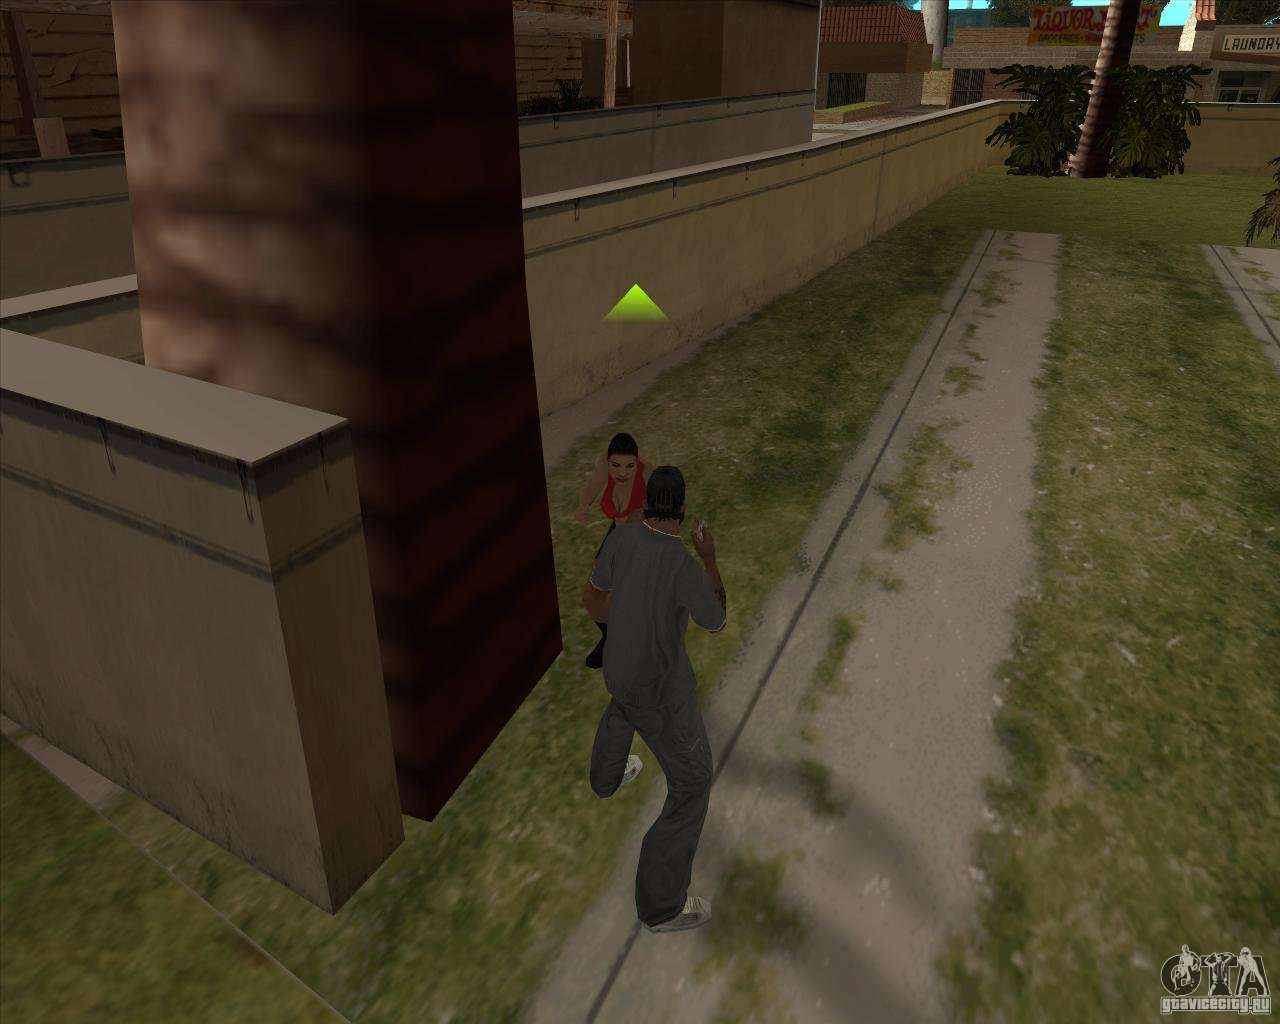 9 Epic Glitches In Grand Theft Auto Games, Ranked By How Hilarious They Are  - FandomWire